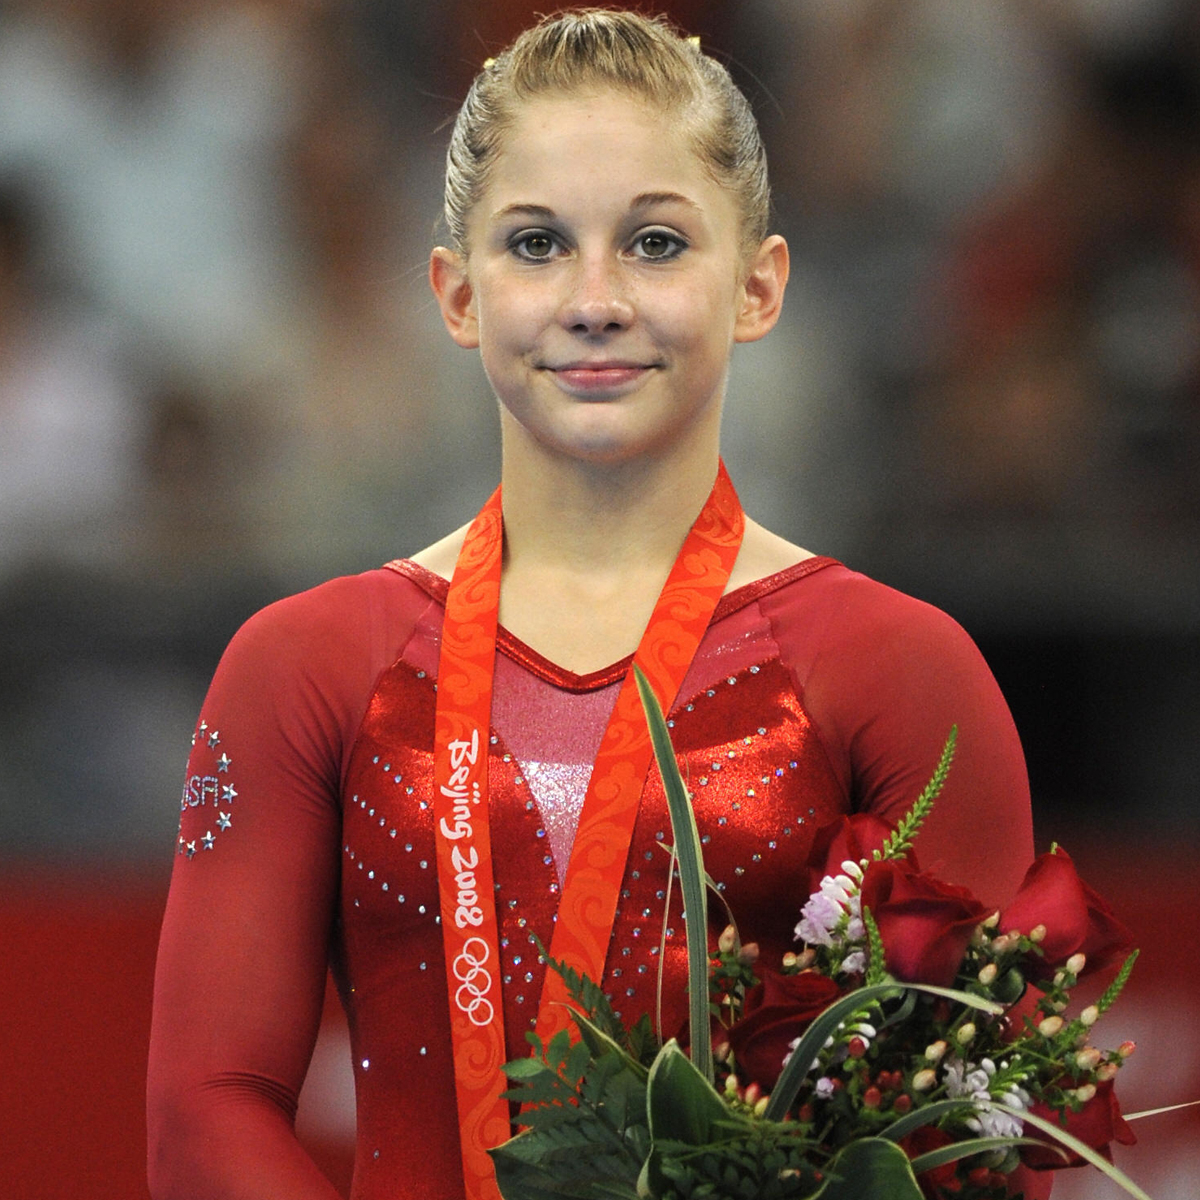 Shawn Johnson Reacts to Daughter’s Request to Do “Big Girl Gymnastics”